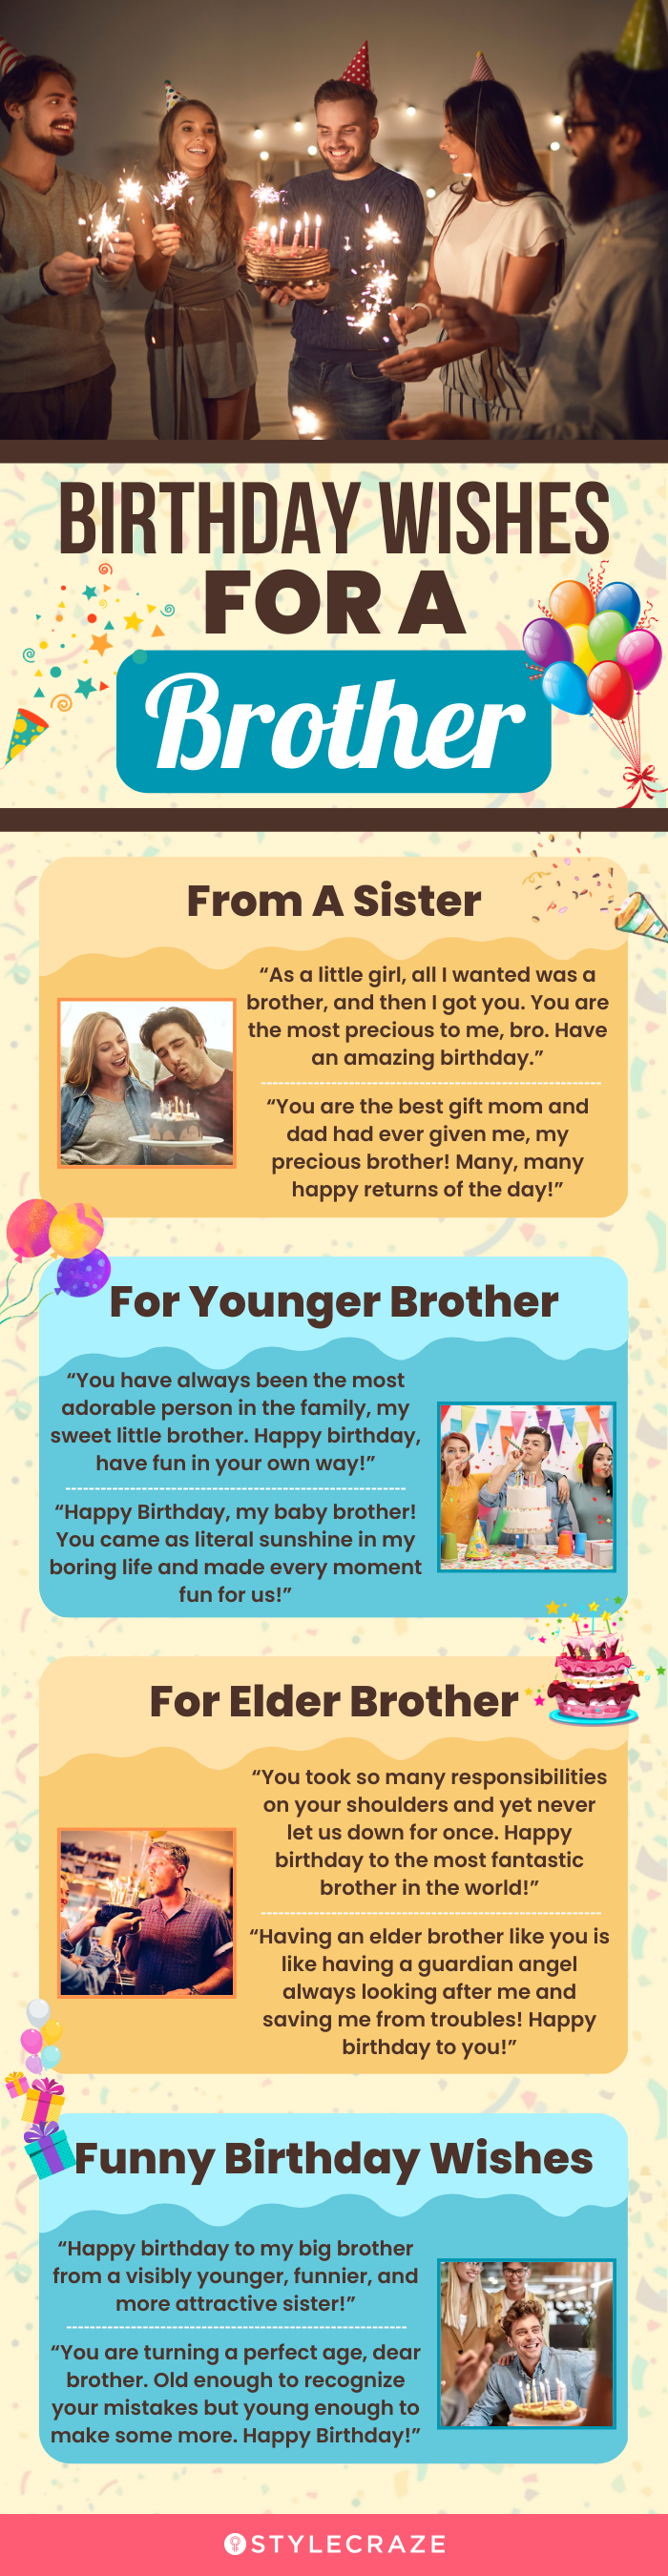 birthday wishes for a brother (infographic)